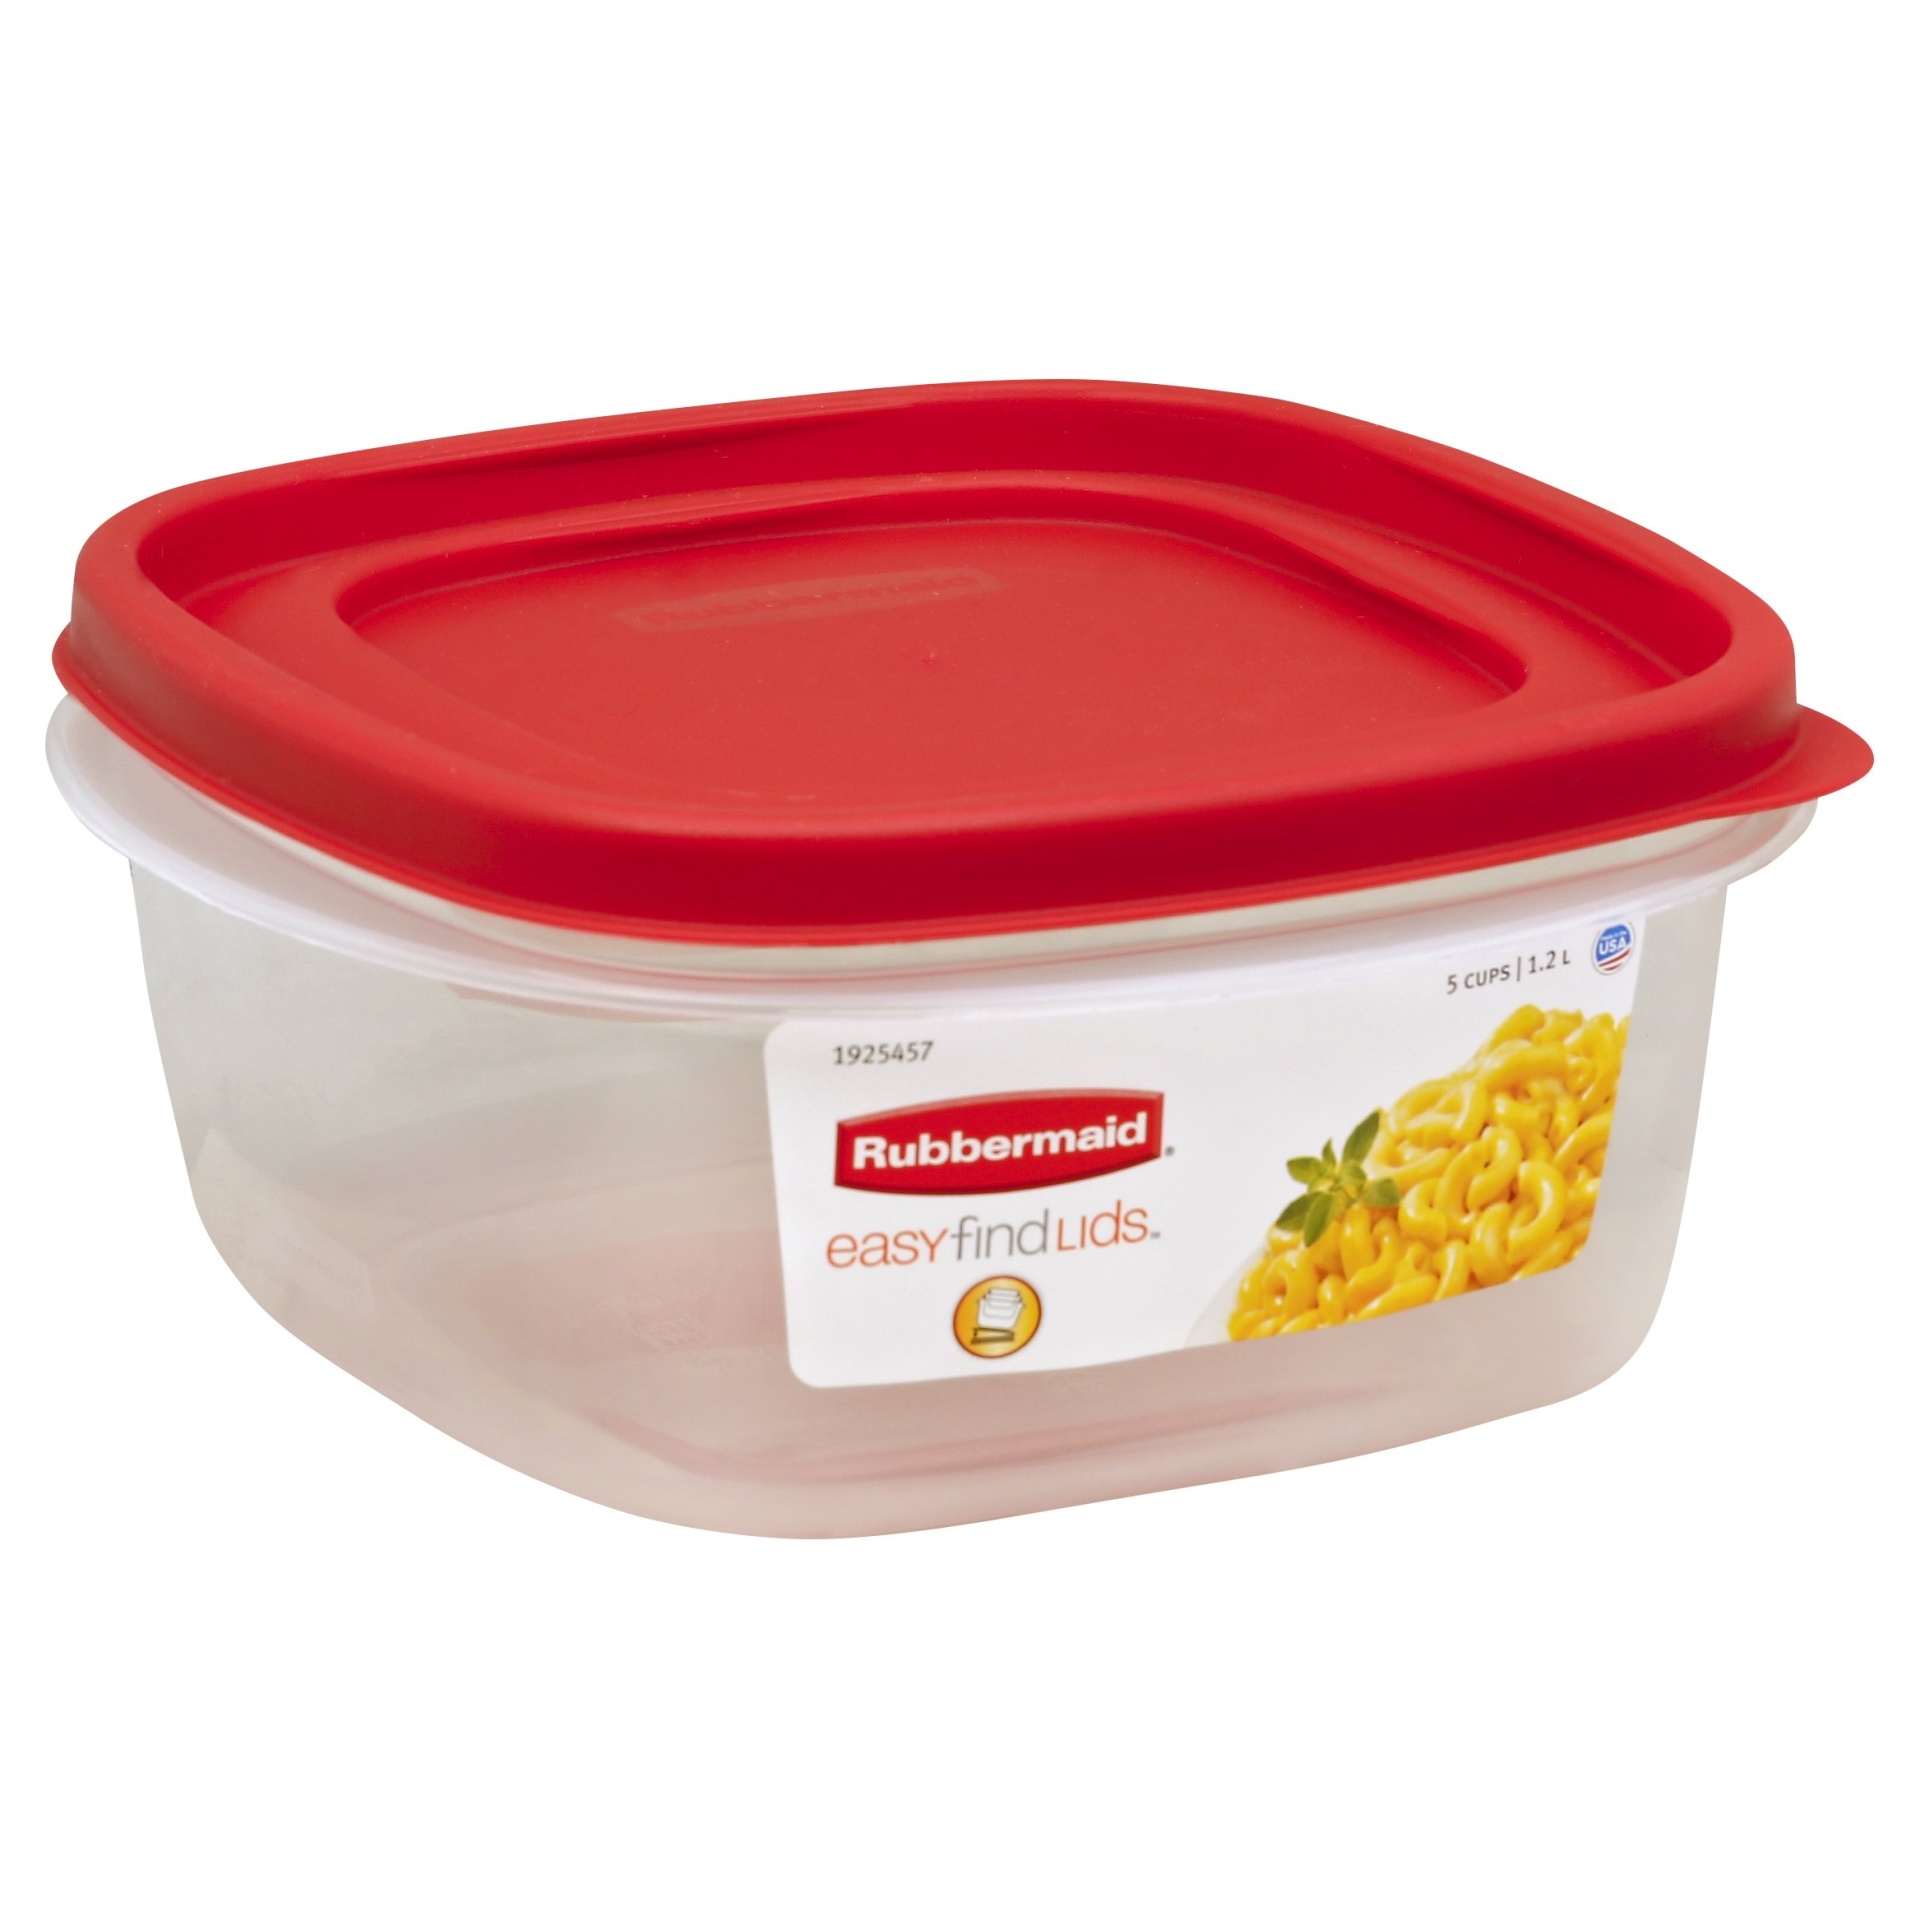 slide 1 of 2, Rubbermaid Easy Find Lids Container, 5 cup